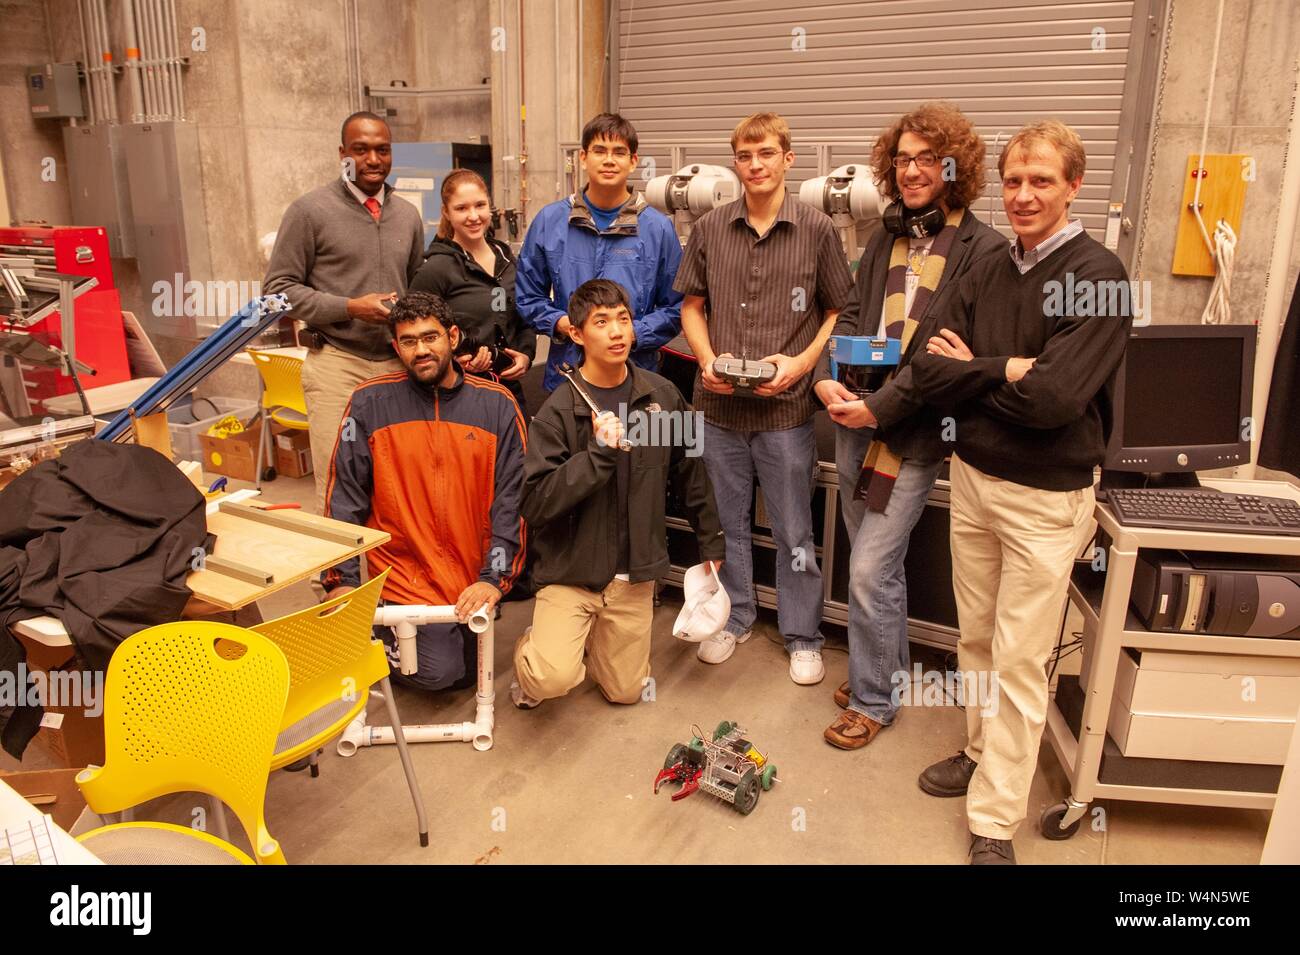 Members of the Johns Hopkins Robotics Club, pose together with a remote controlled robot, at the Johns Hopkins University, Baltimore, Maryland, December, 2009. From the Homewood Photography Collection. () Stock Photo